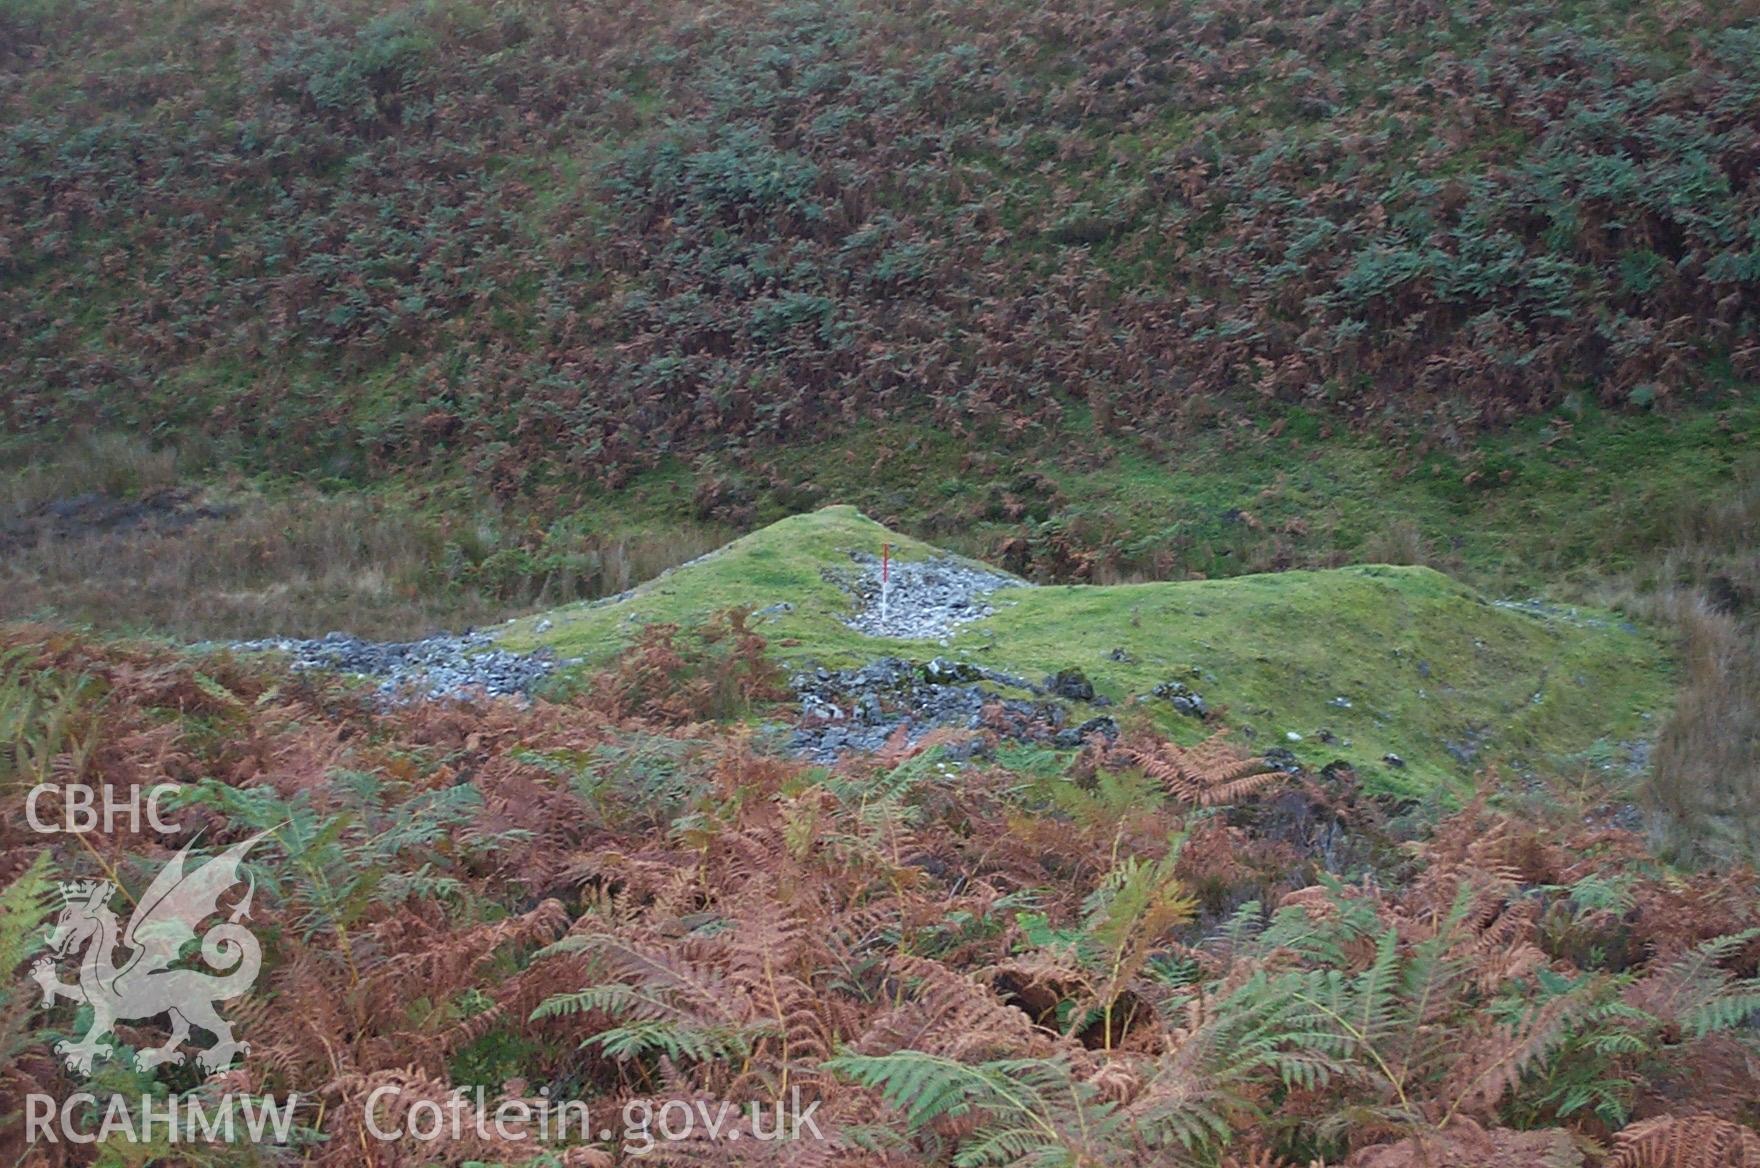 Digital photograph of Nant Craig y Moch Quarries taken on 14/10/2002 by Oxford Archaeology North during the Ruabon Mountain Upland Survey